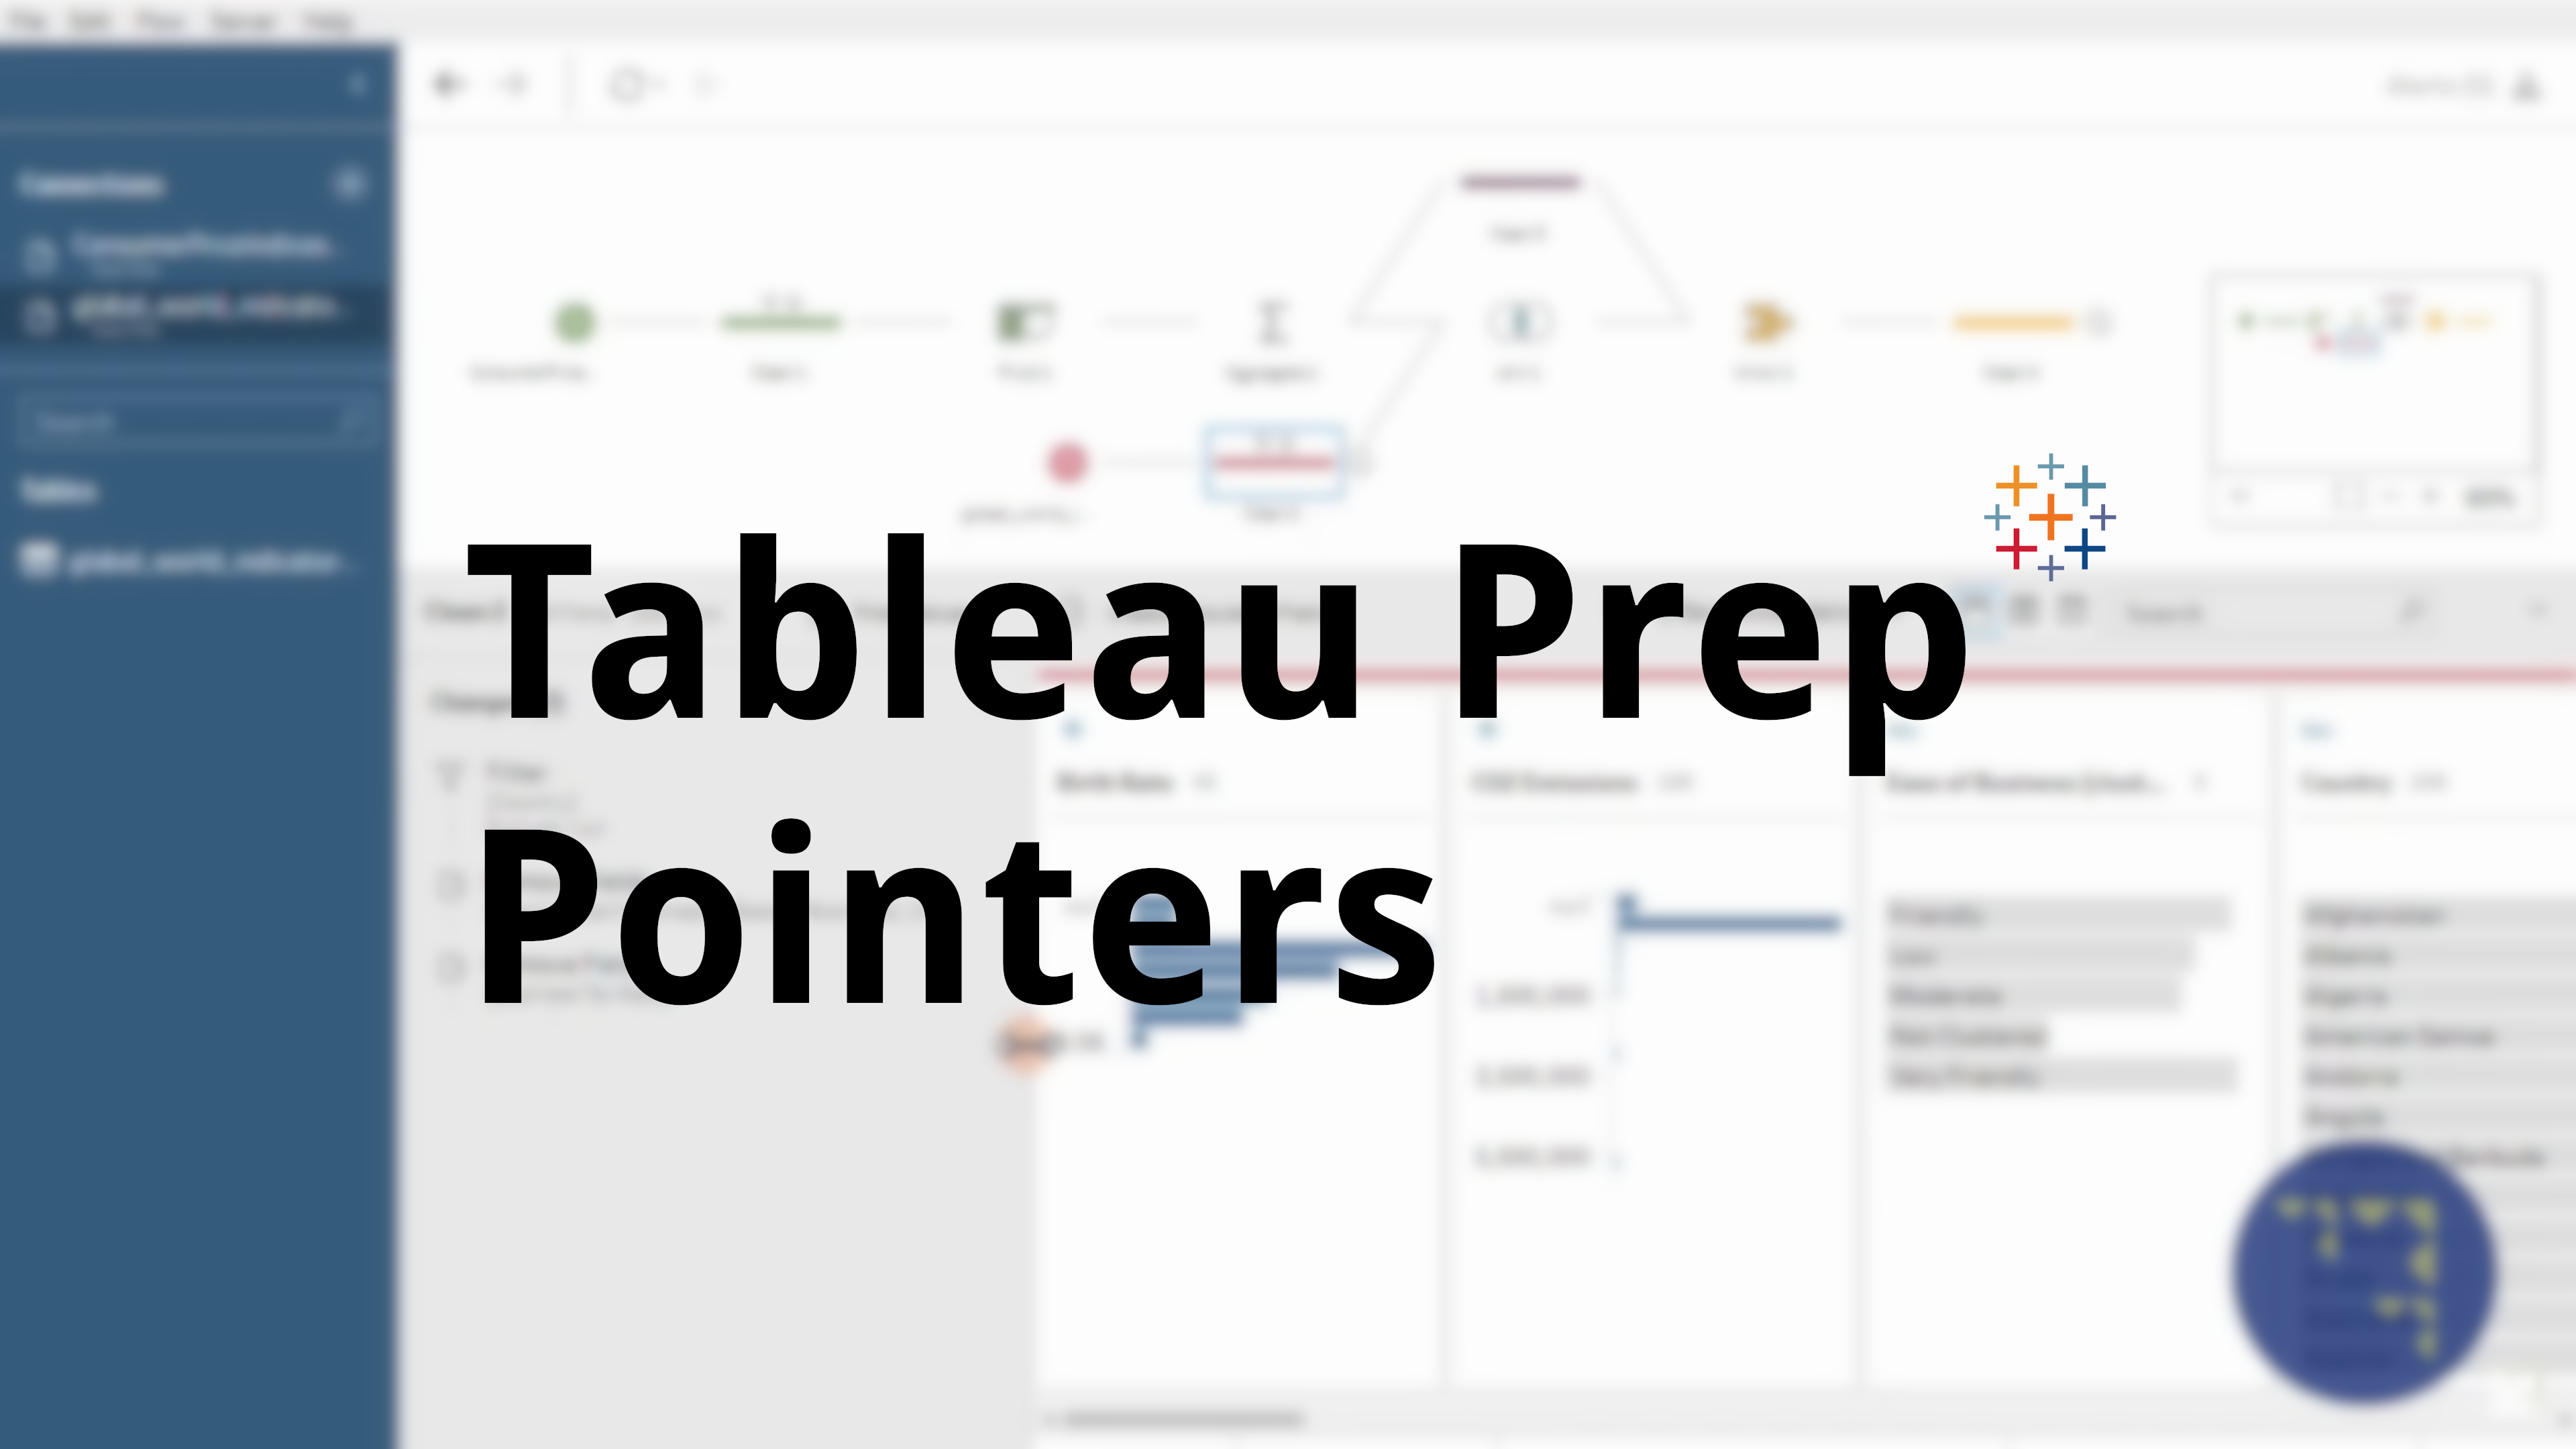 Introduction to Tableau Prep Pointers